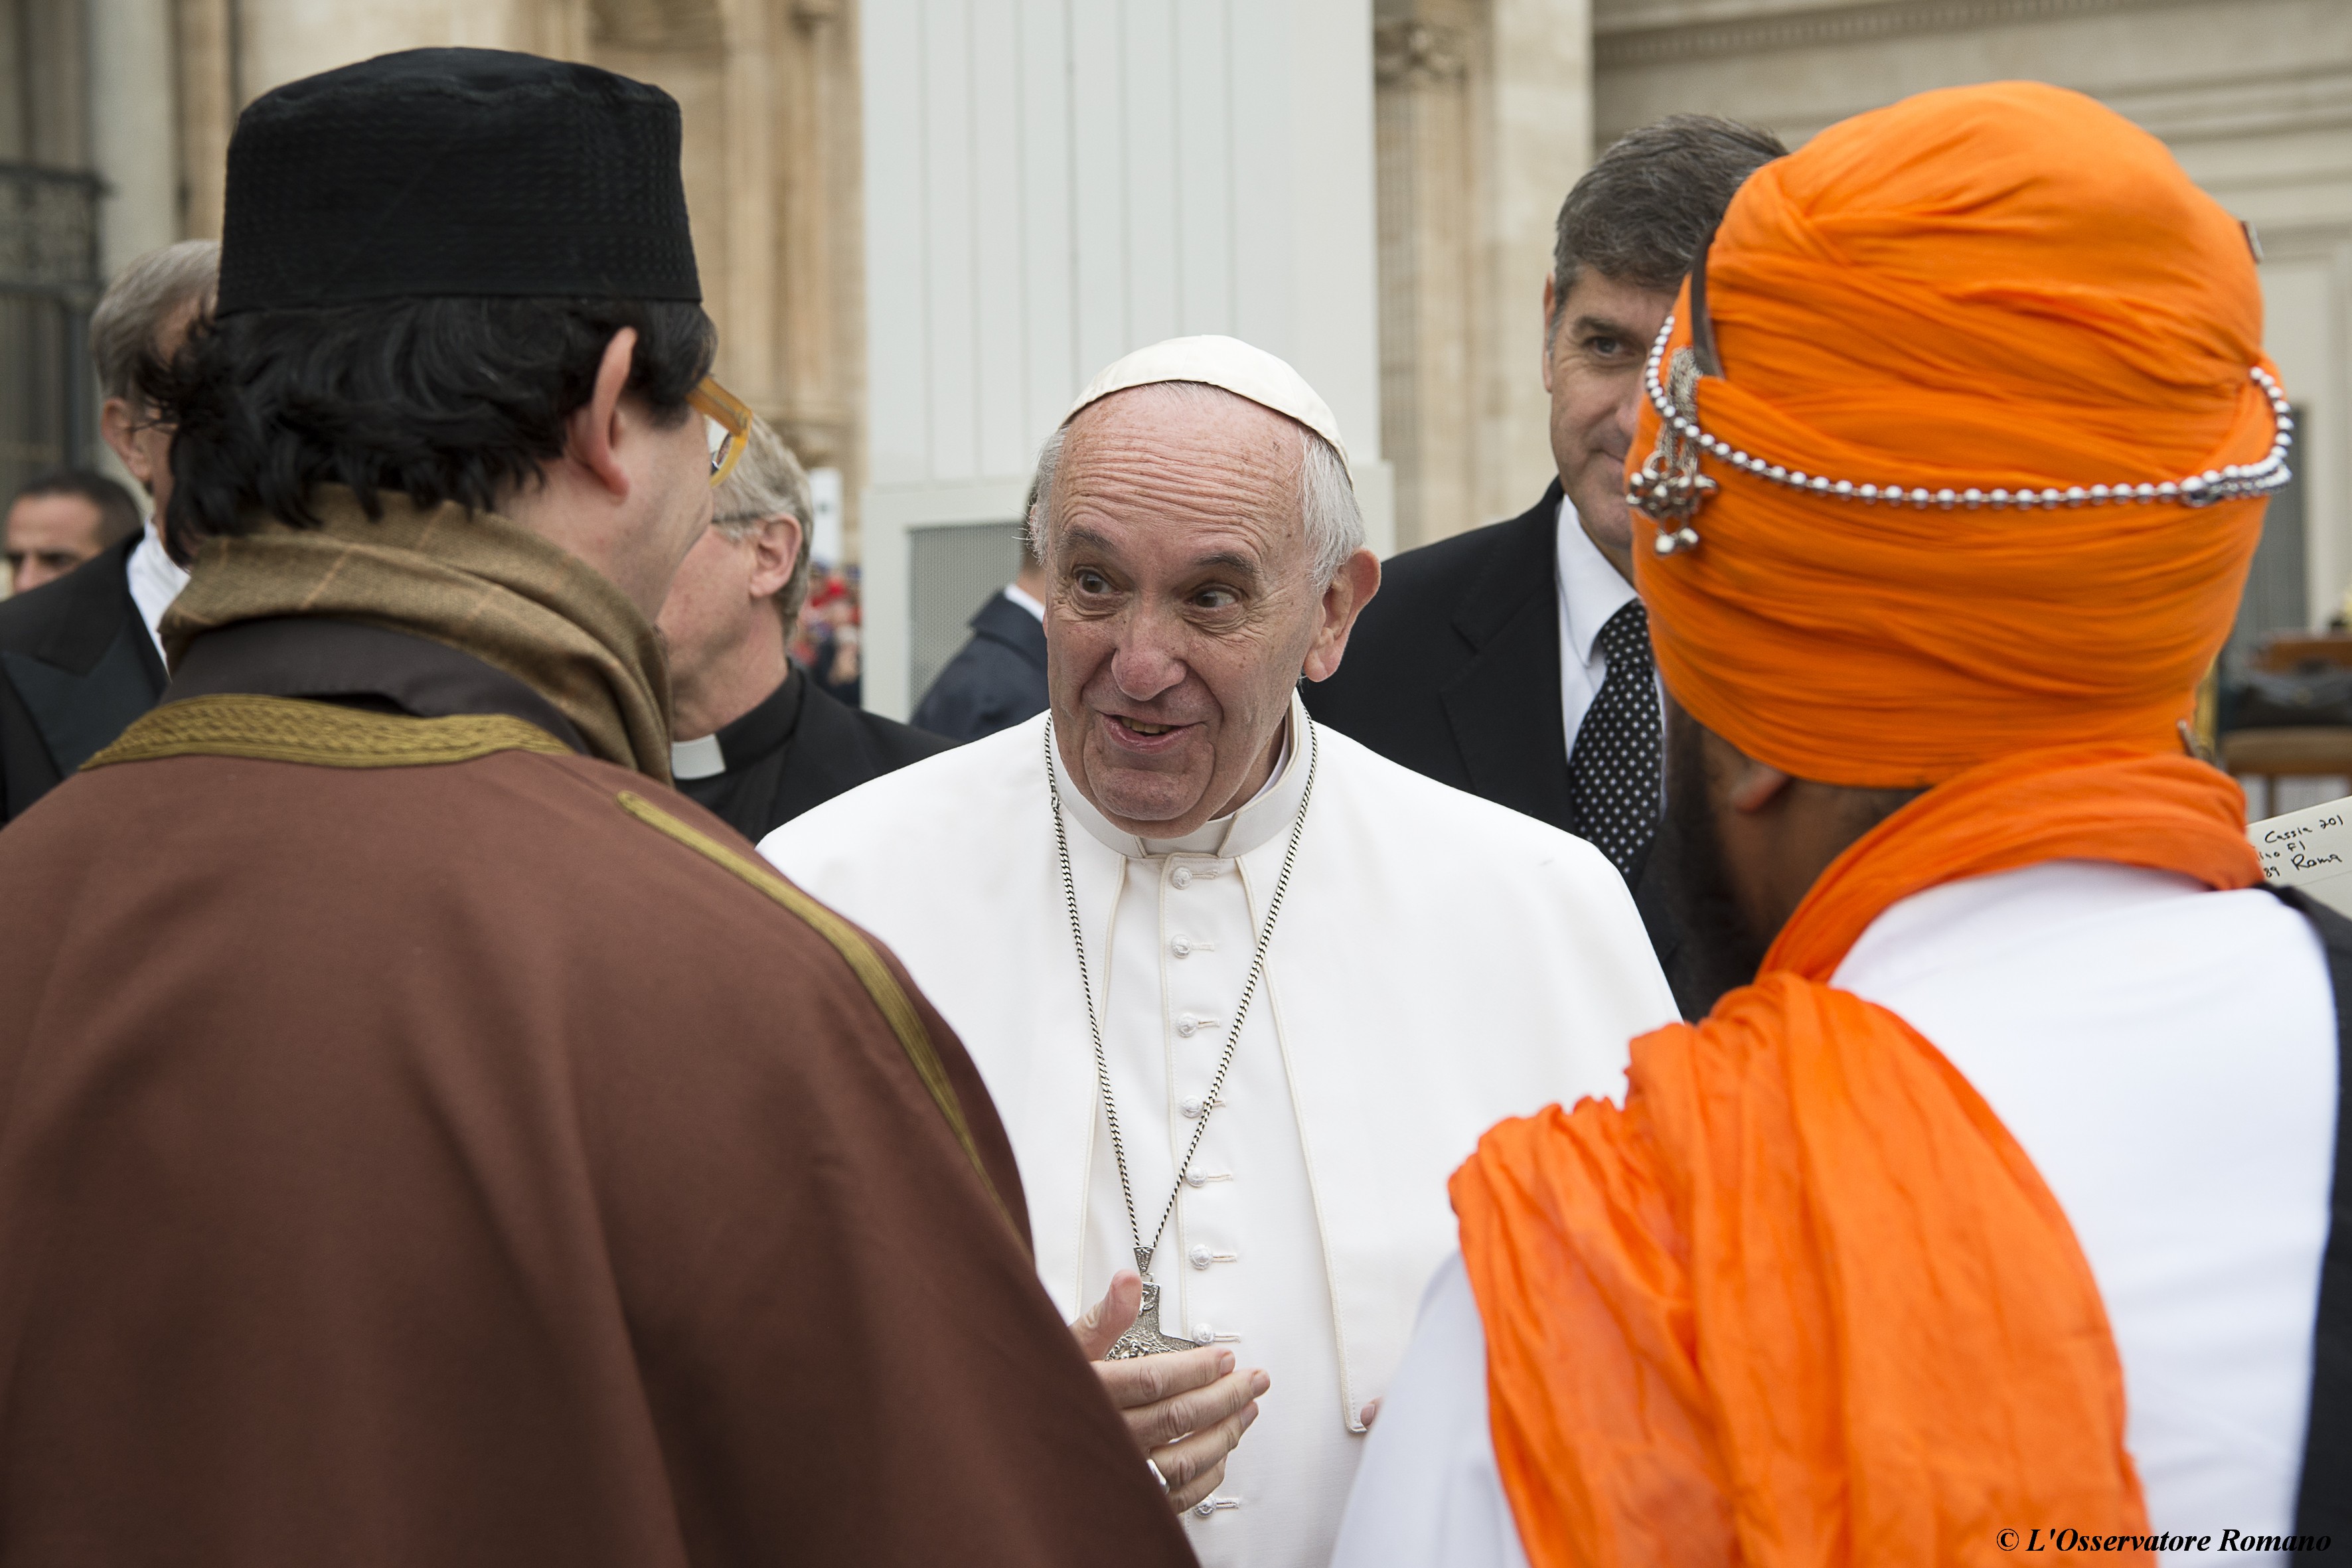 "Interreligious" General Audience in St. Peter's Square of Wednesday